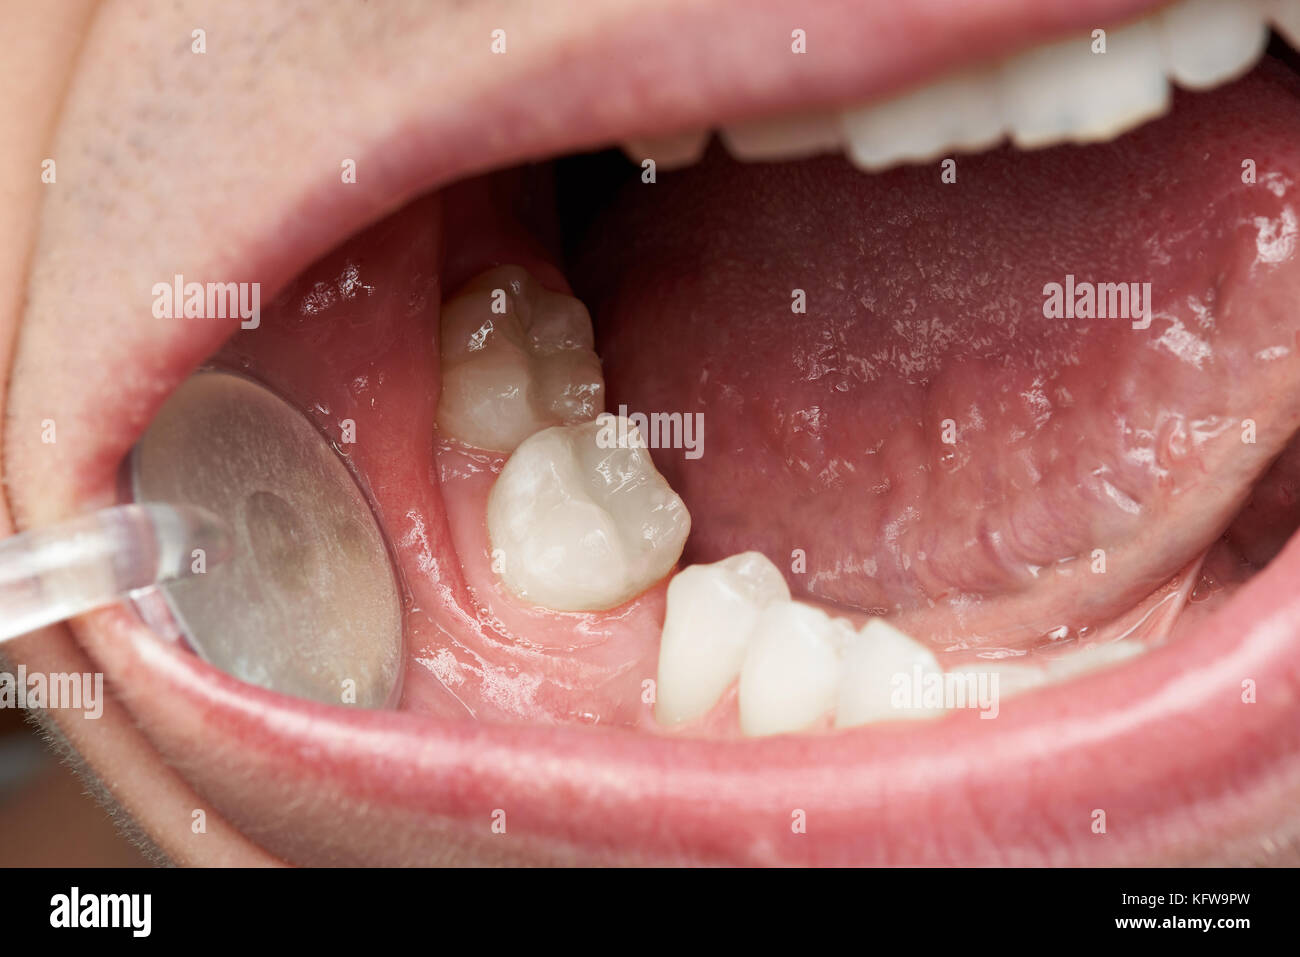 Macro of space without tooth in patient mouth. Dental theme Stock Photo